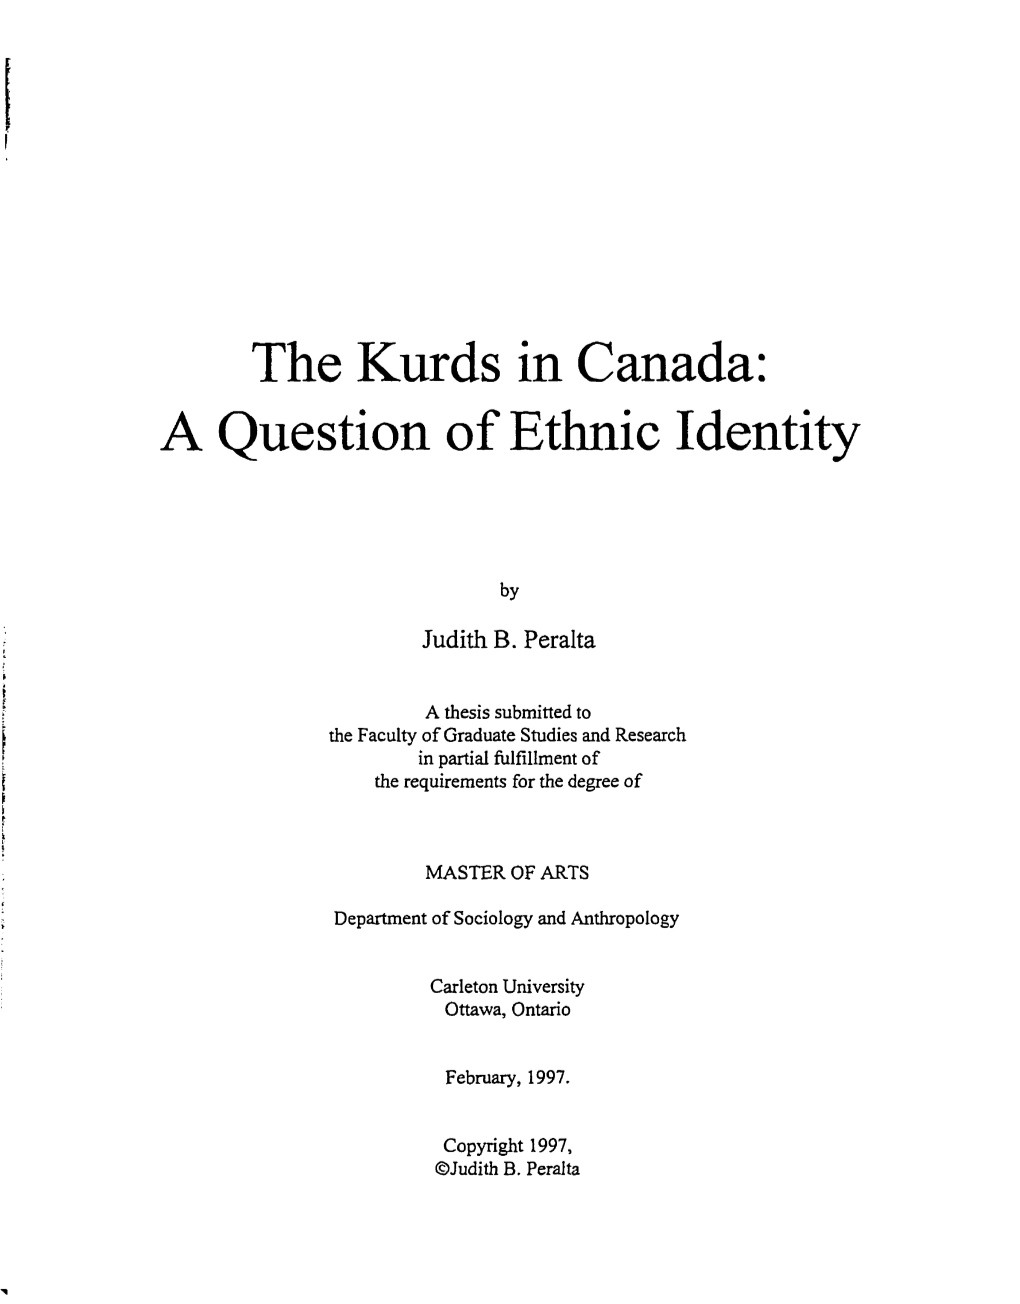 The Kurds in Canada: a Question of Ethnic Identity